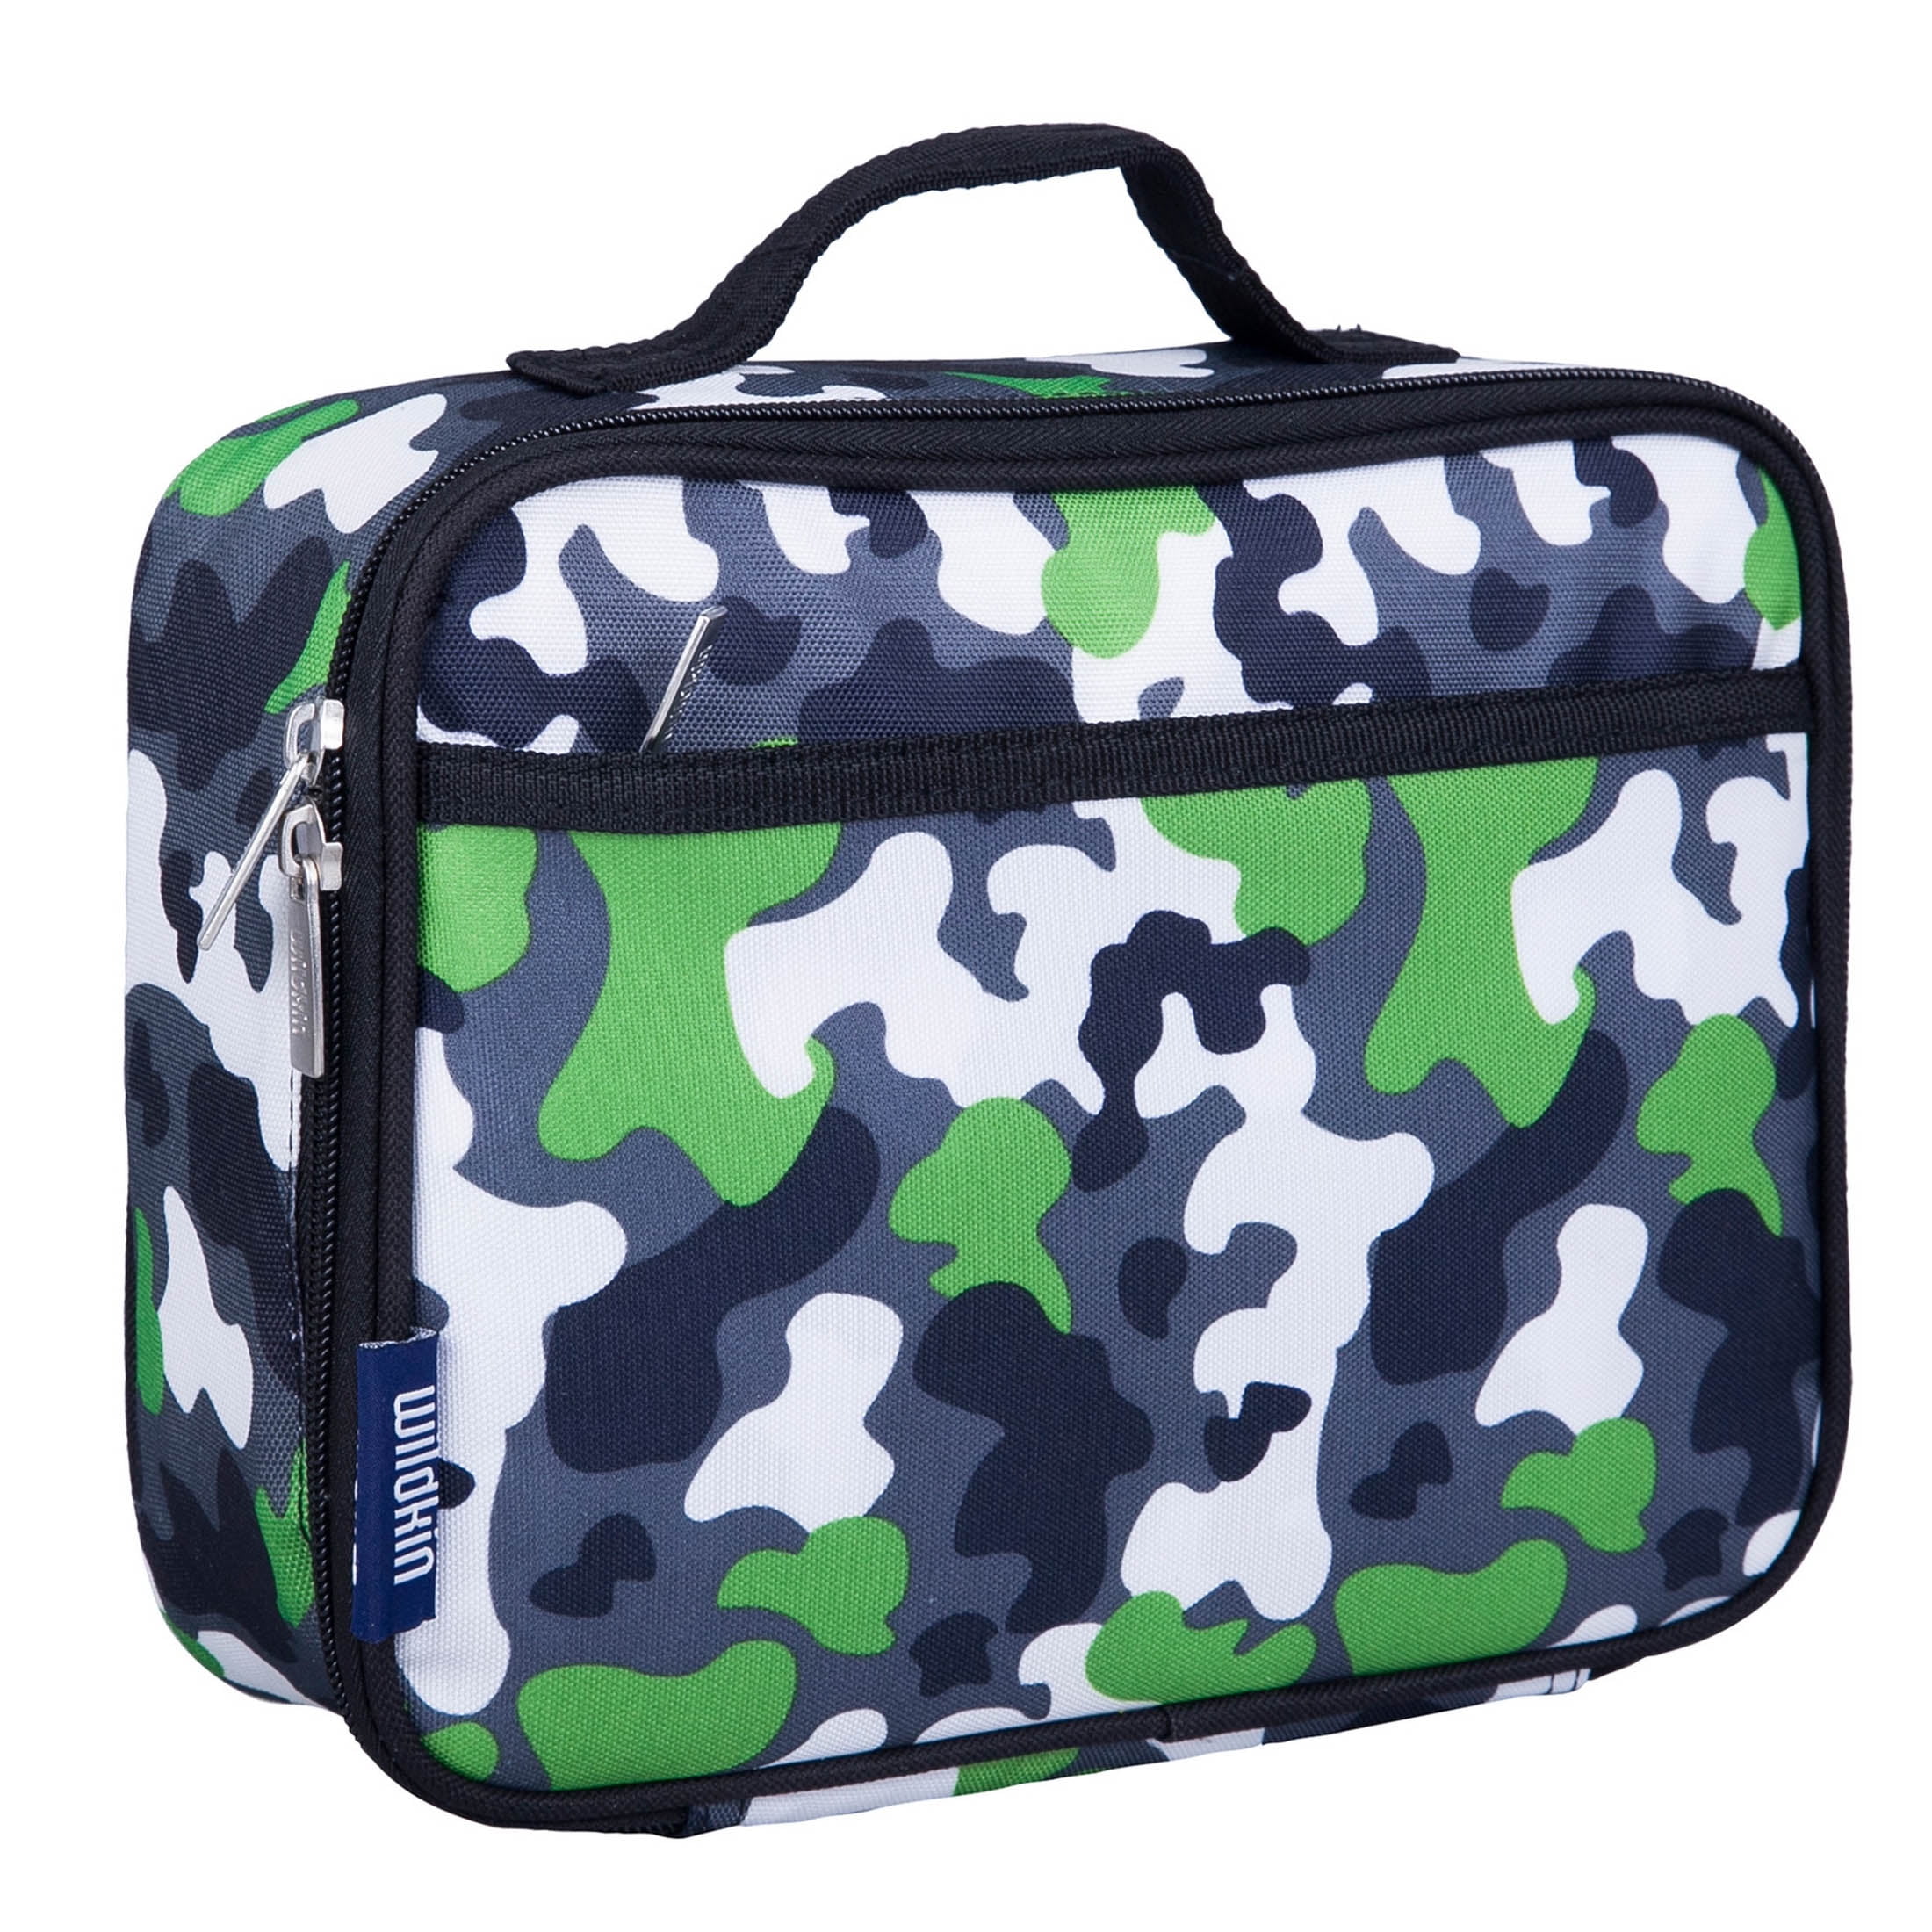 Man V Junk Camouflage Storage Tin Metal Cammo Junk Lunch Box Toy Container Gift 